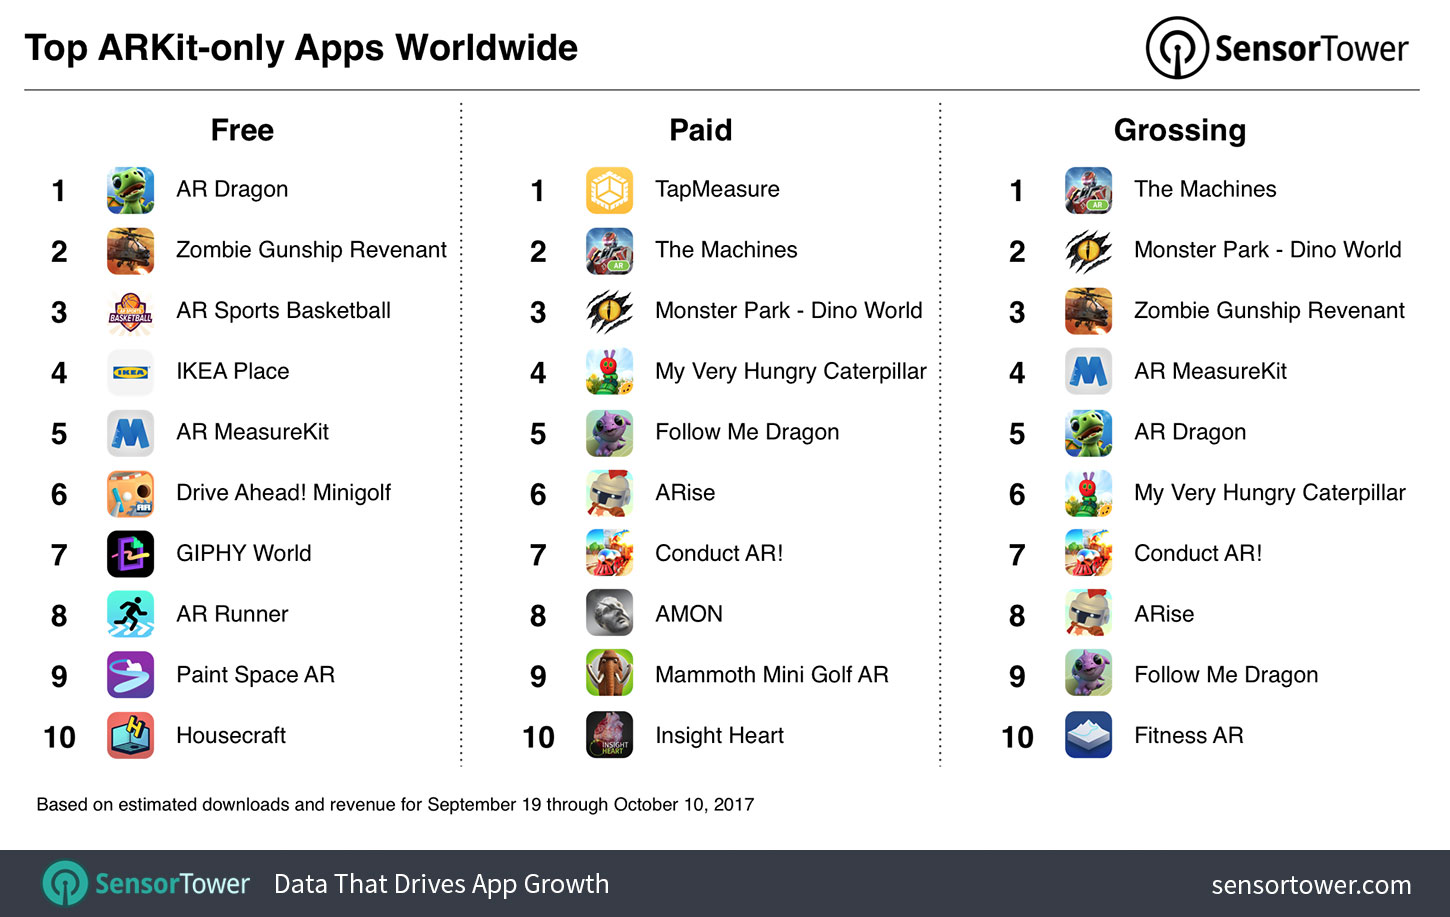 Ranking of top free, paid, and grossing ARKit apps overall for September 19 to October 10, 2017